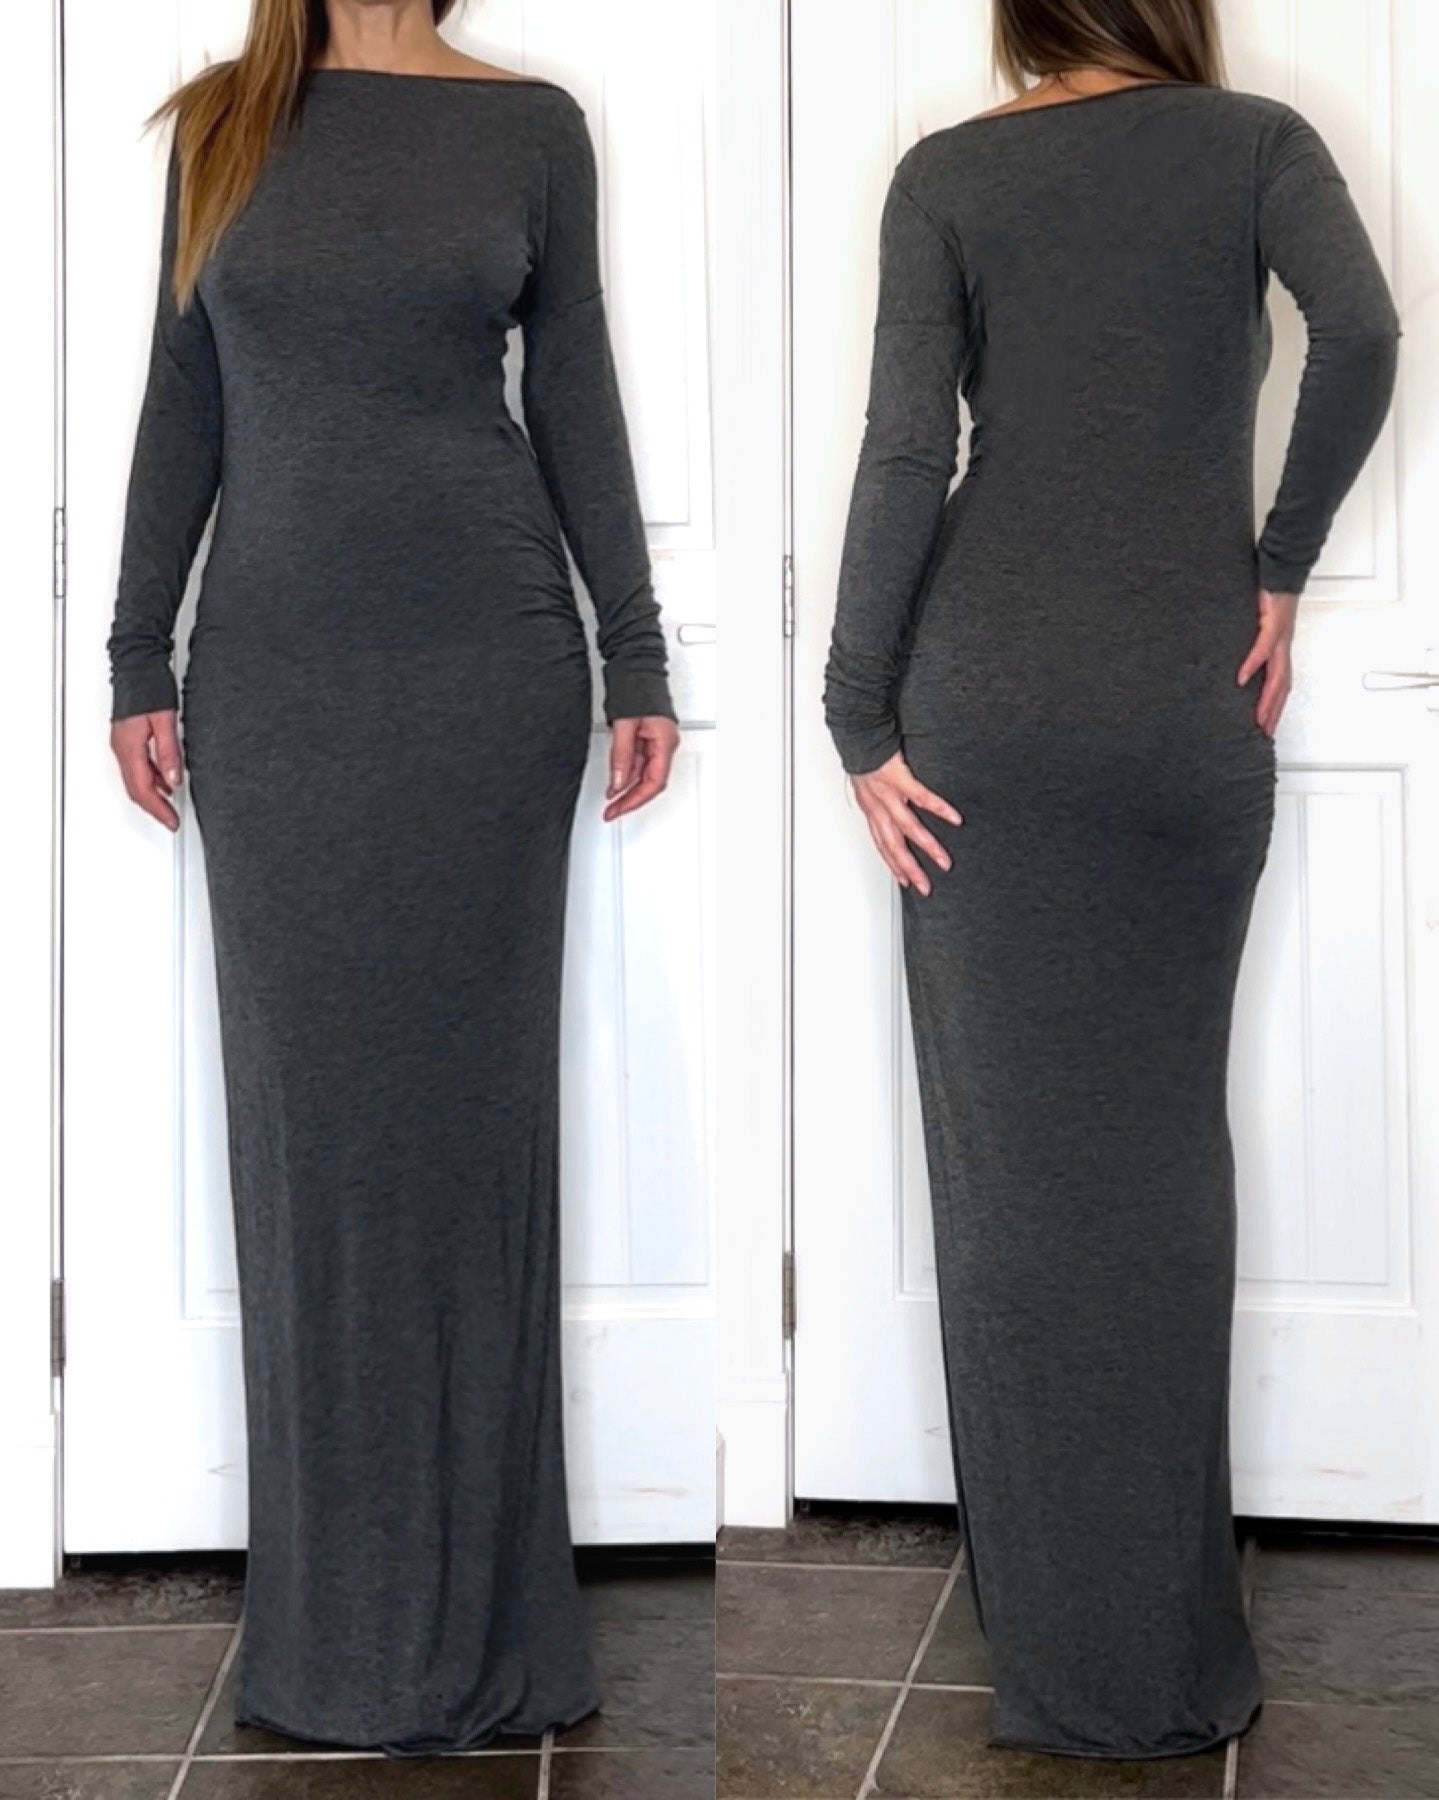 Women’s Dark Heather Grey Long Sleeve Boat Neck Soft and Comfortable Maxi Dress by Revolution Girl